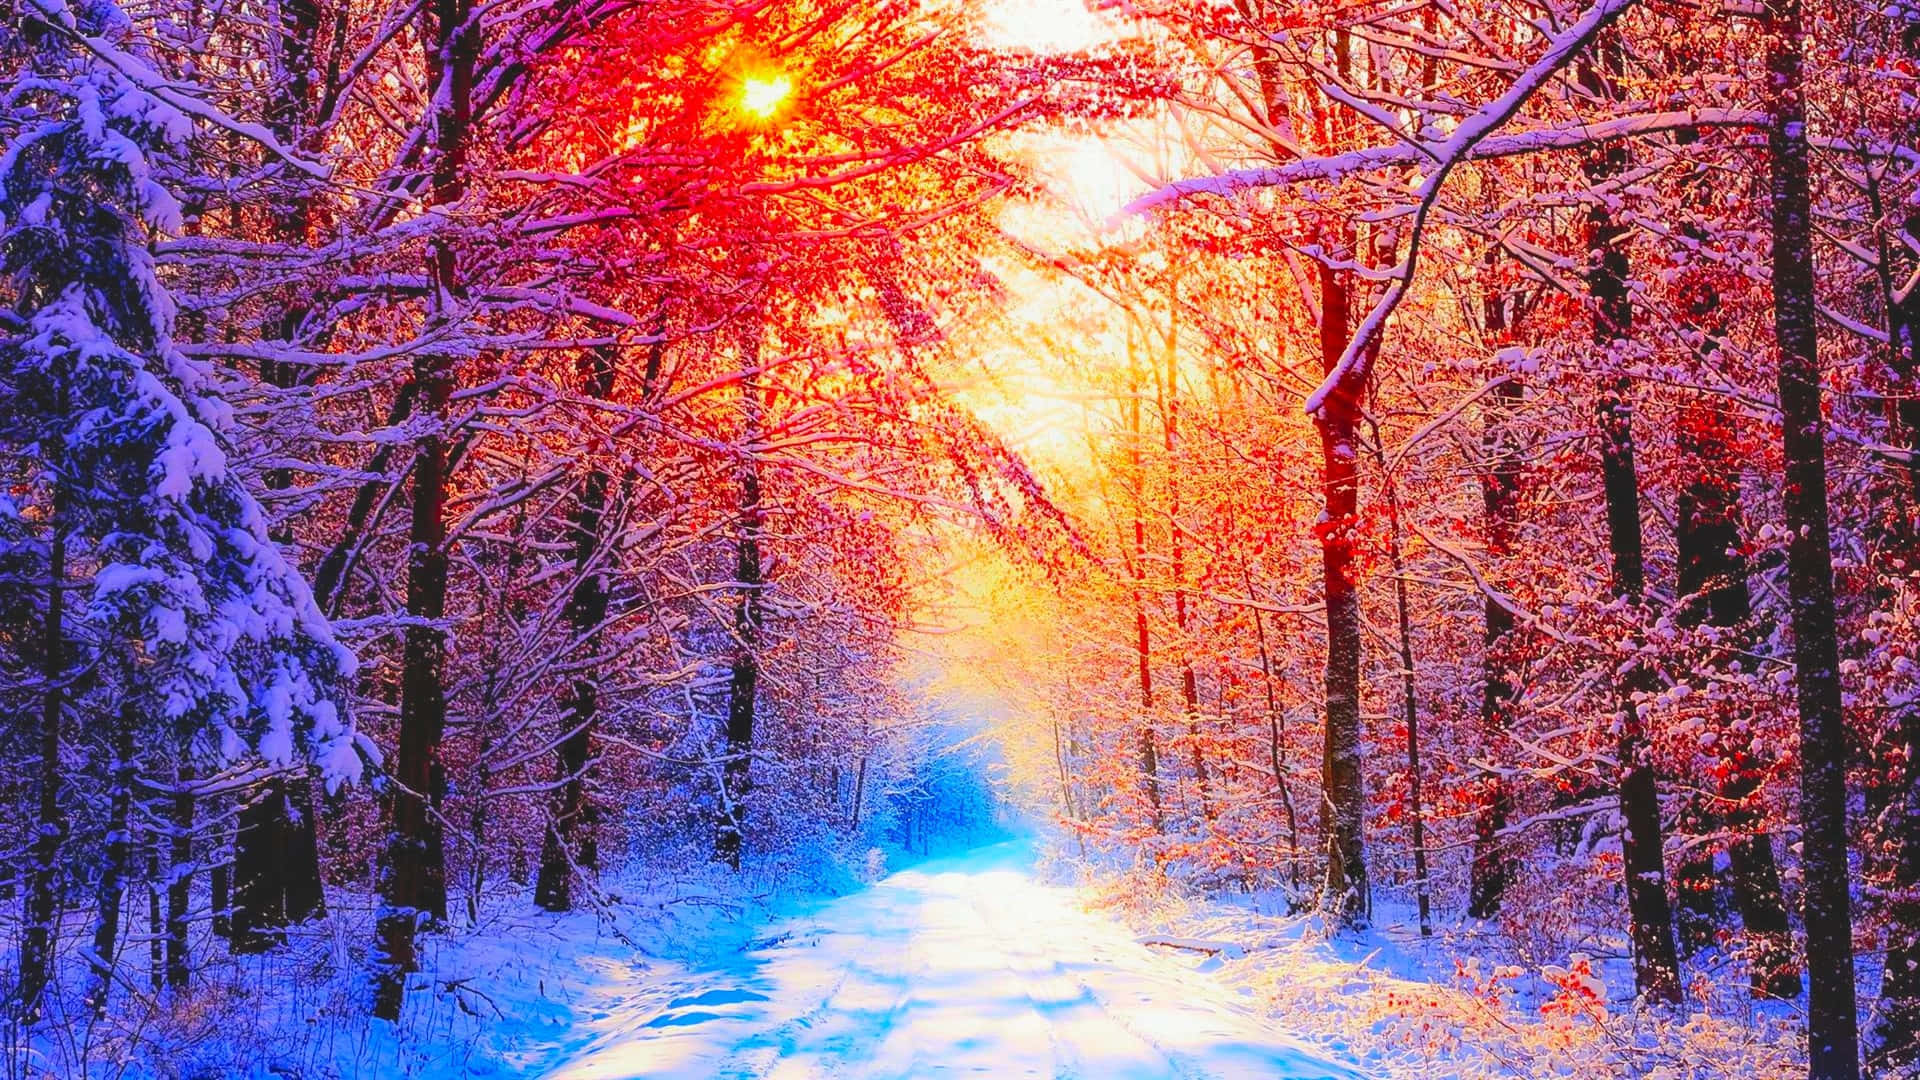 A Snowy Path With A Sun Shining Through The Trees